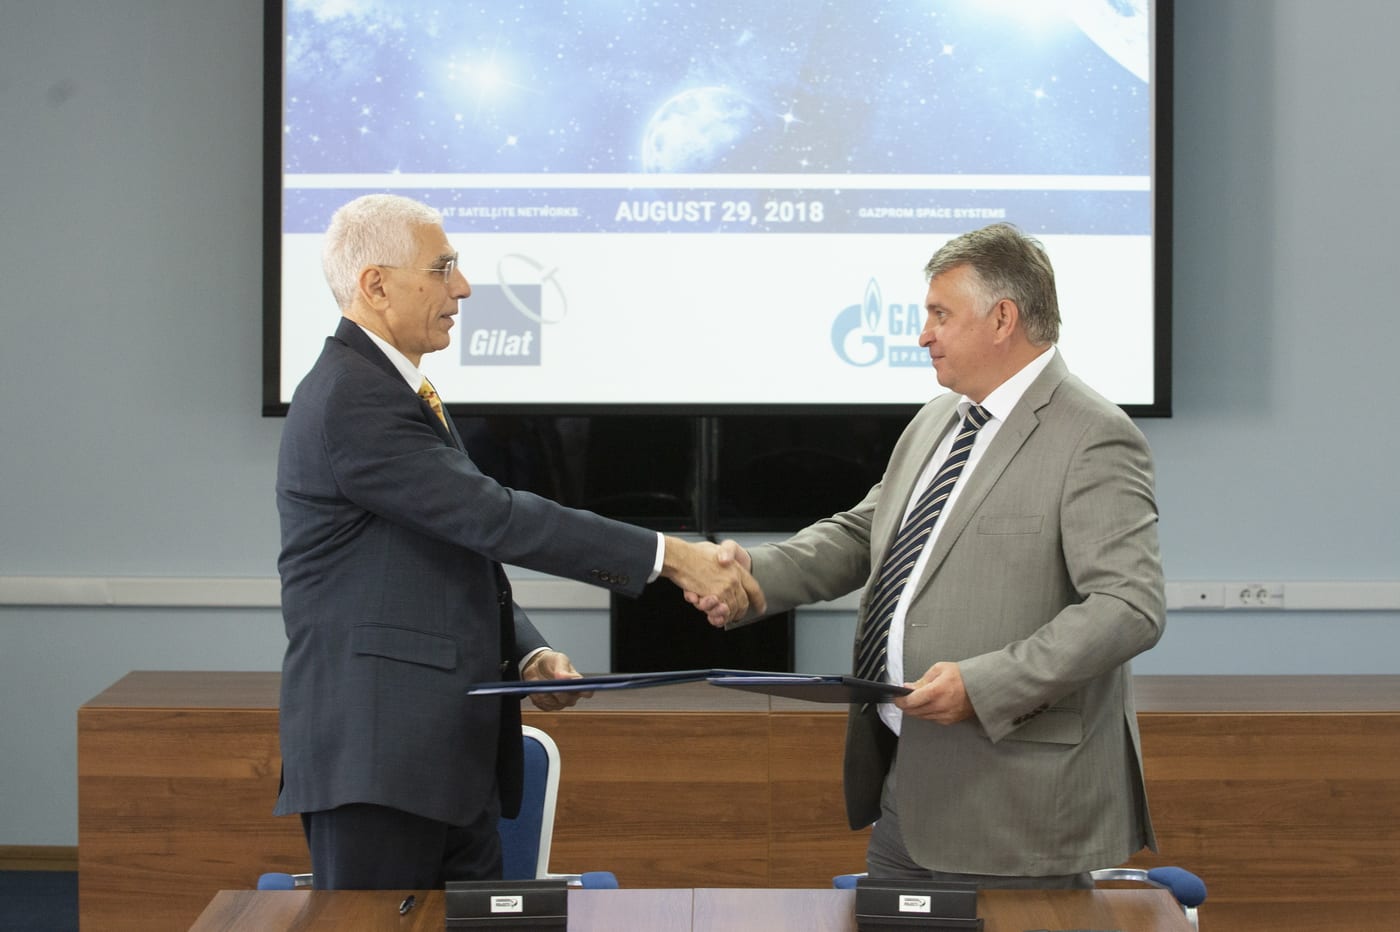 Gazprom Space Systems and Gilat Sign $18M Contract to Provide Broadband Connectivity Across Russia over New Yamal 601 Ka Satellite